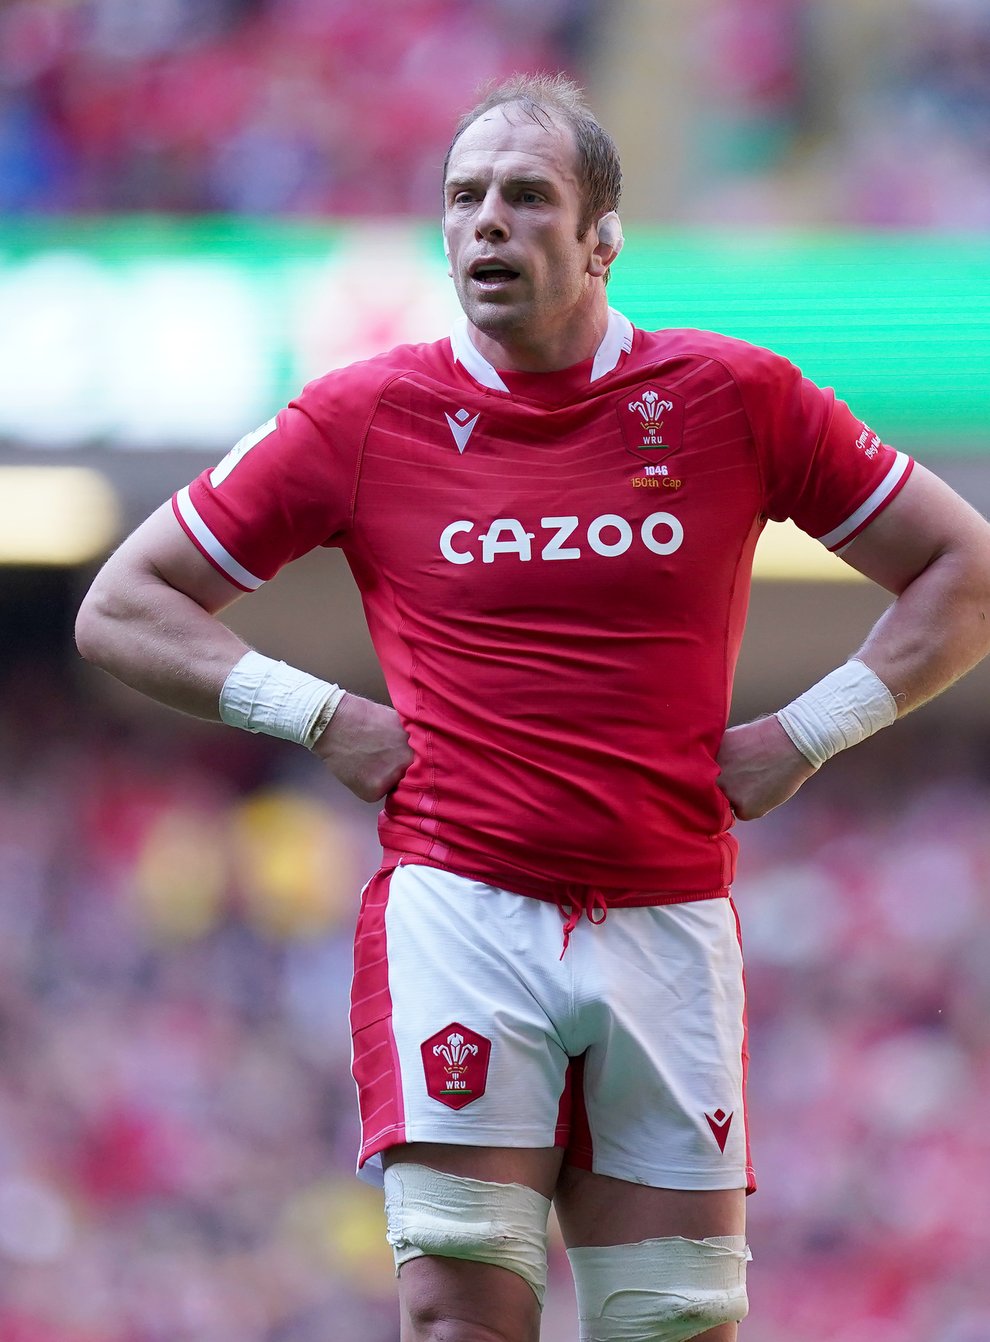 Alun Wyn Jones has made a world record 162 Test match appearances for Wales and the British and Irish Lions (Mike Egerton/PA)